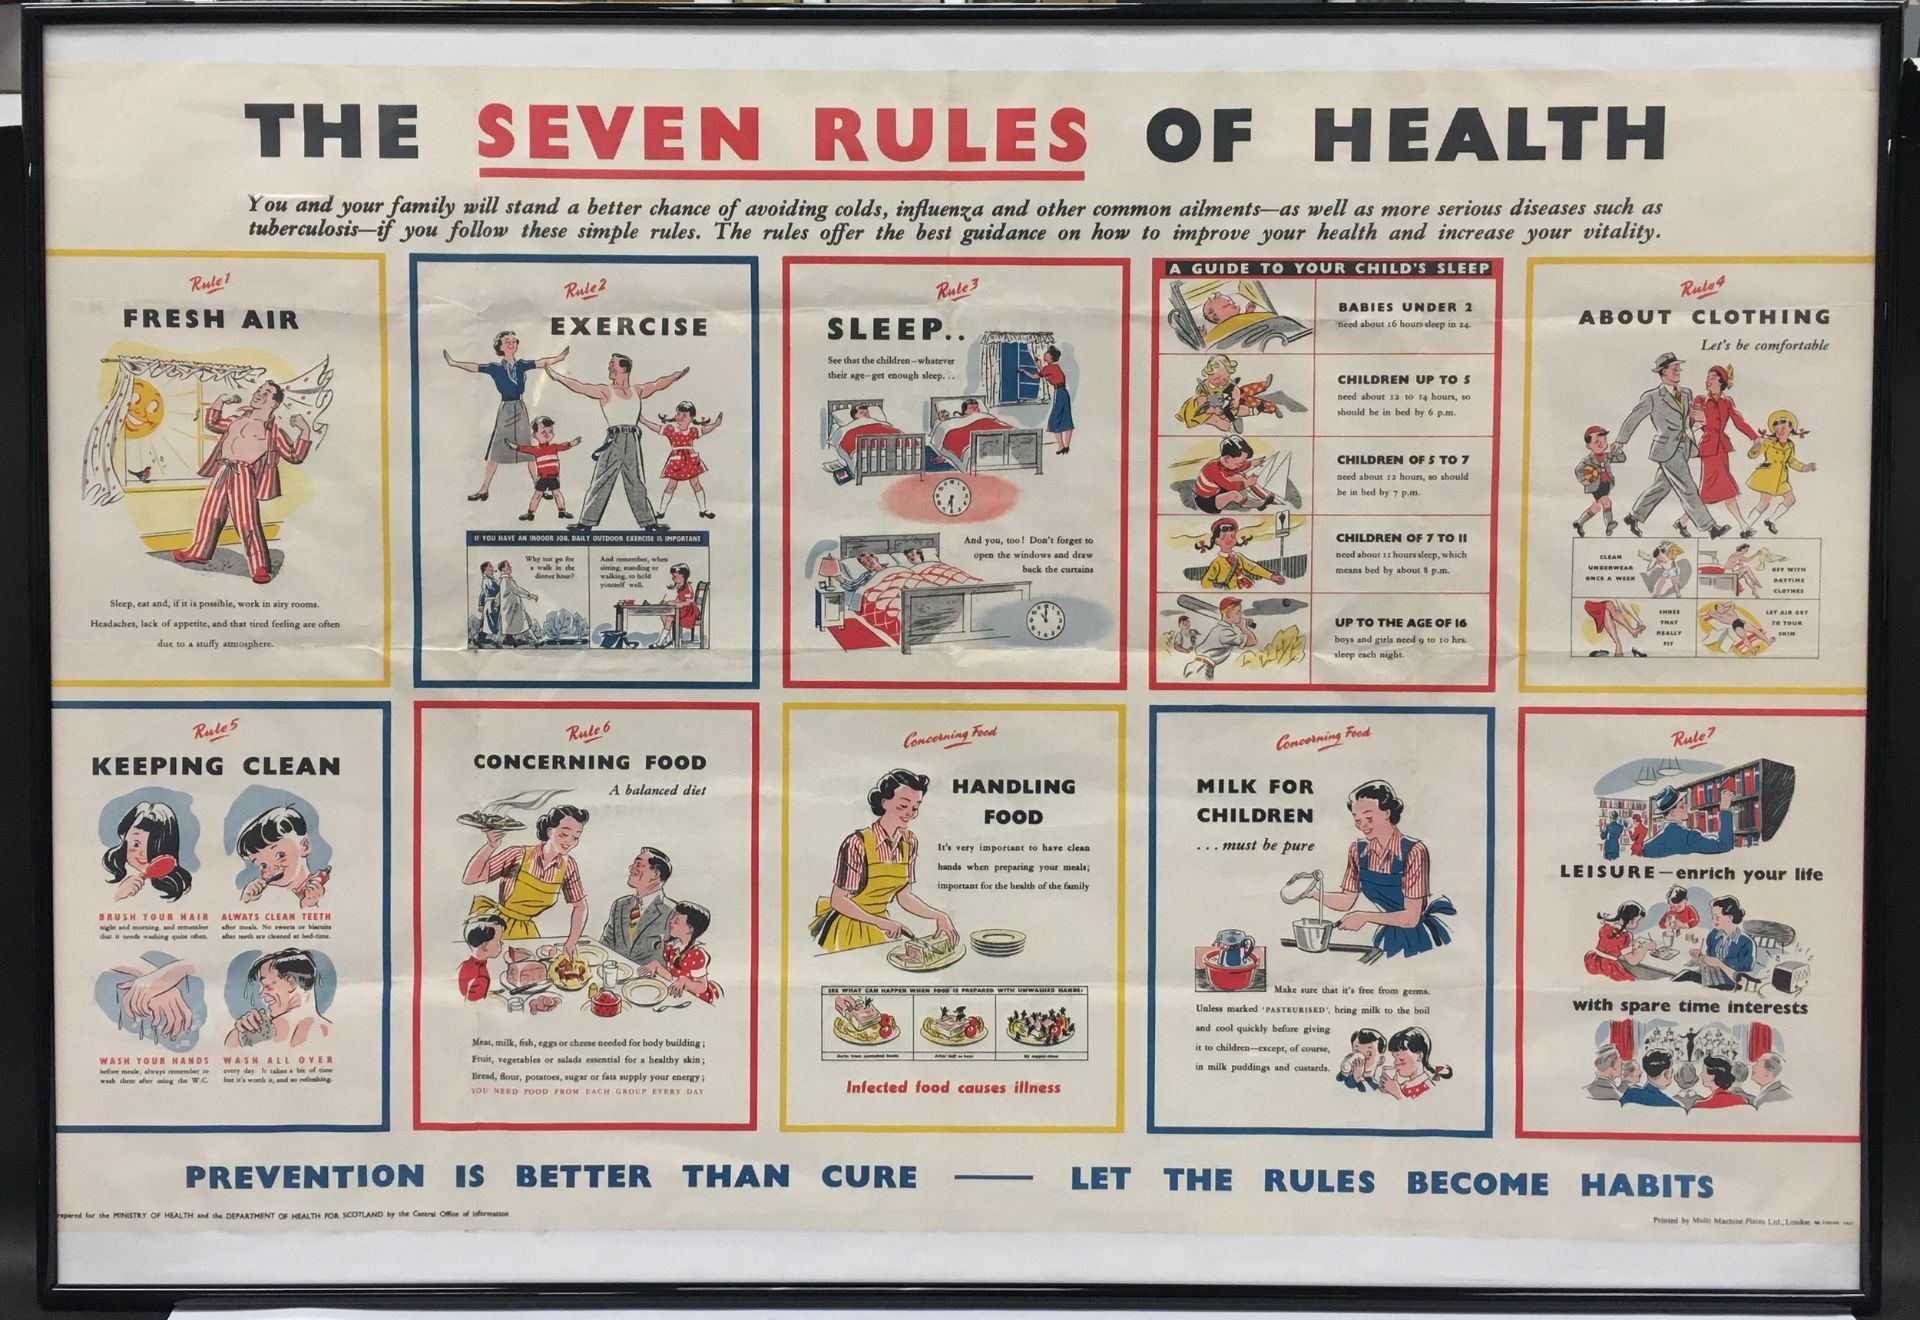 Vintage mid 20th century framed 1940's/1950's "The Seven Rules of Health" poster 101x71cm.